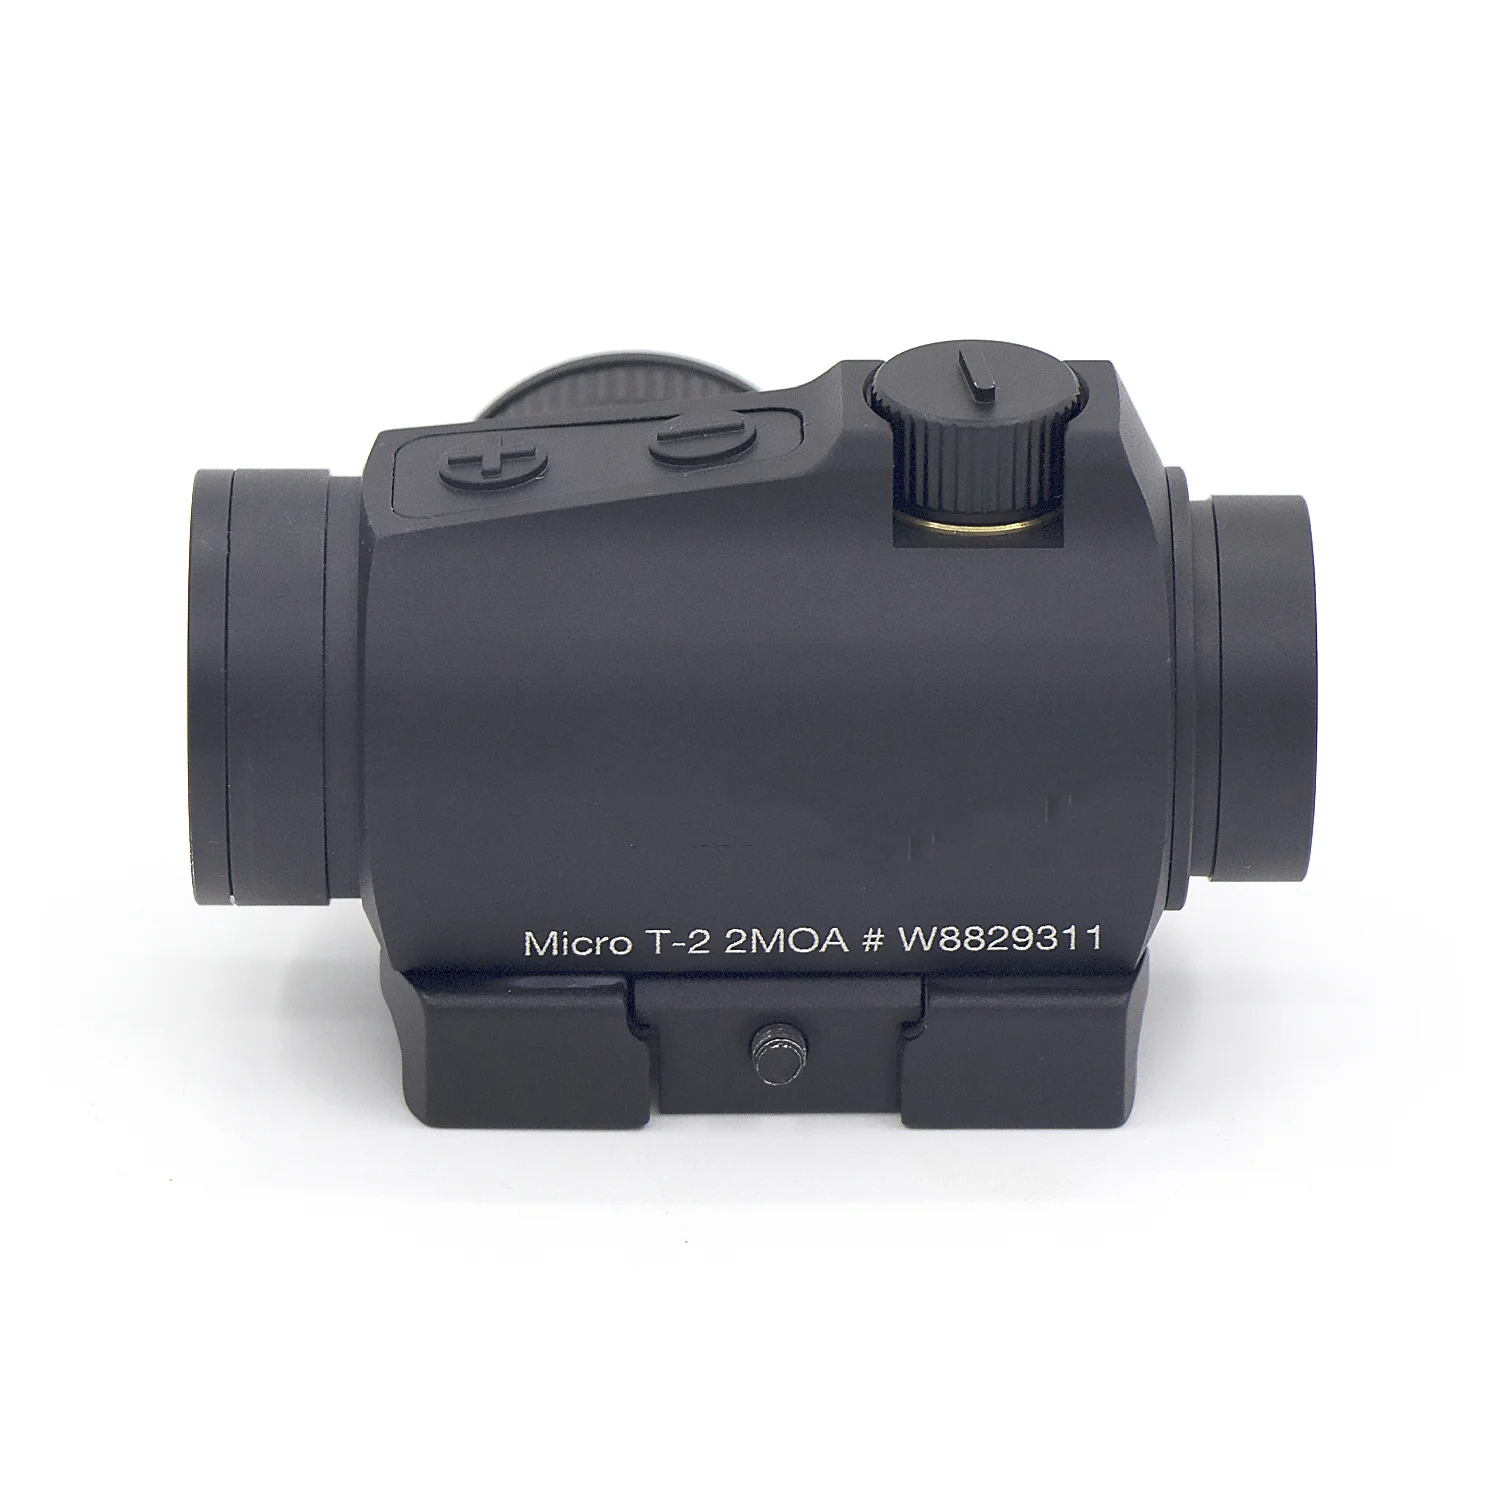 

Optics Red Dot Sight T2 with key button to adjust Brightness 2MOA Outdoor Sports Accessories